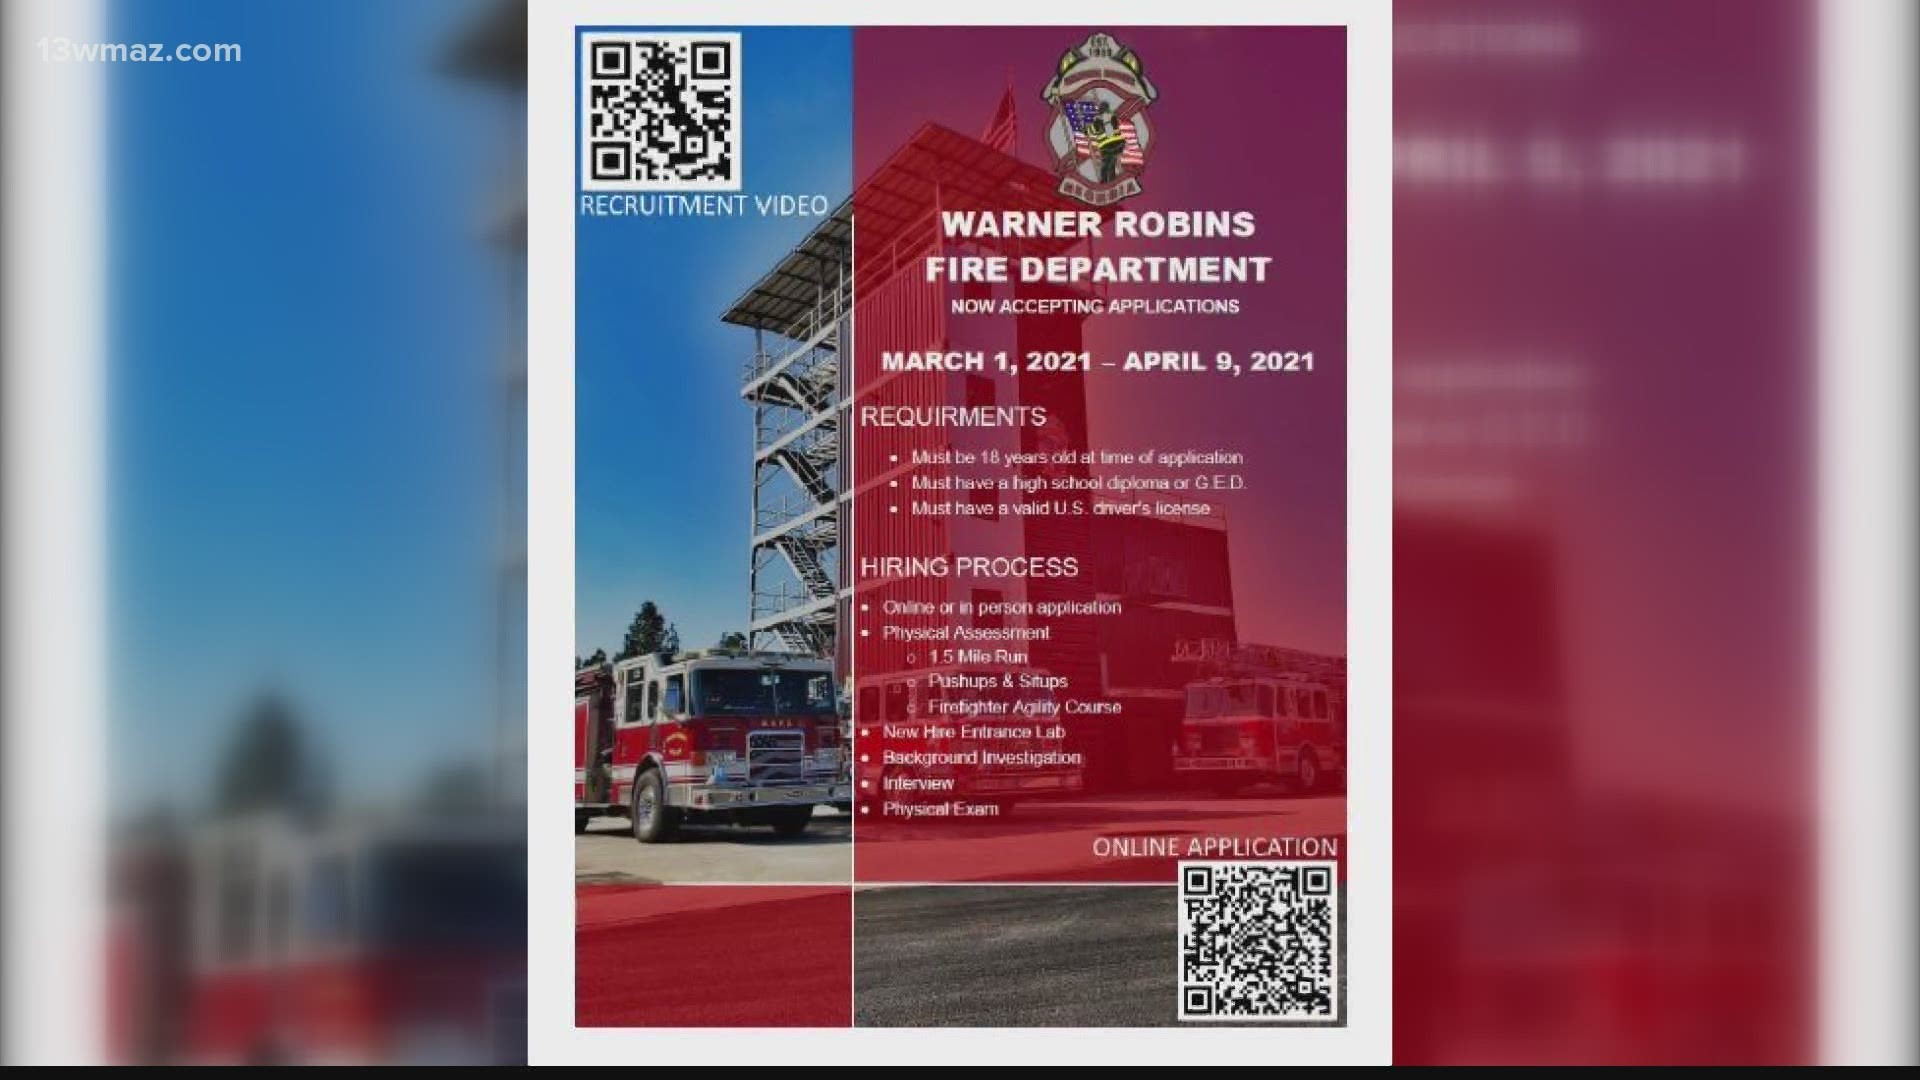 Now's your chance to become a firefighter in the International City